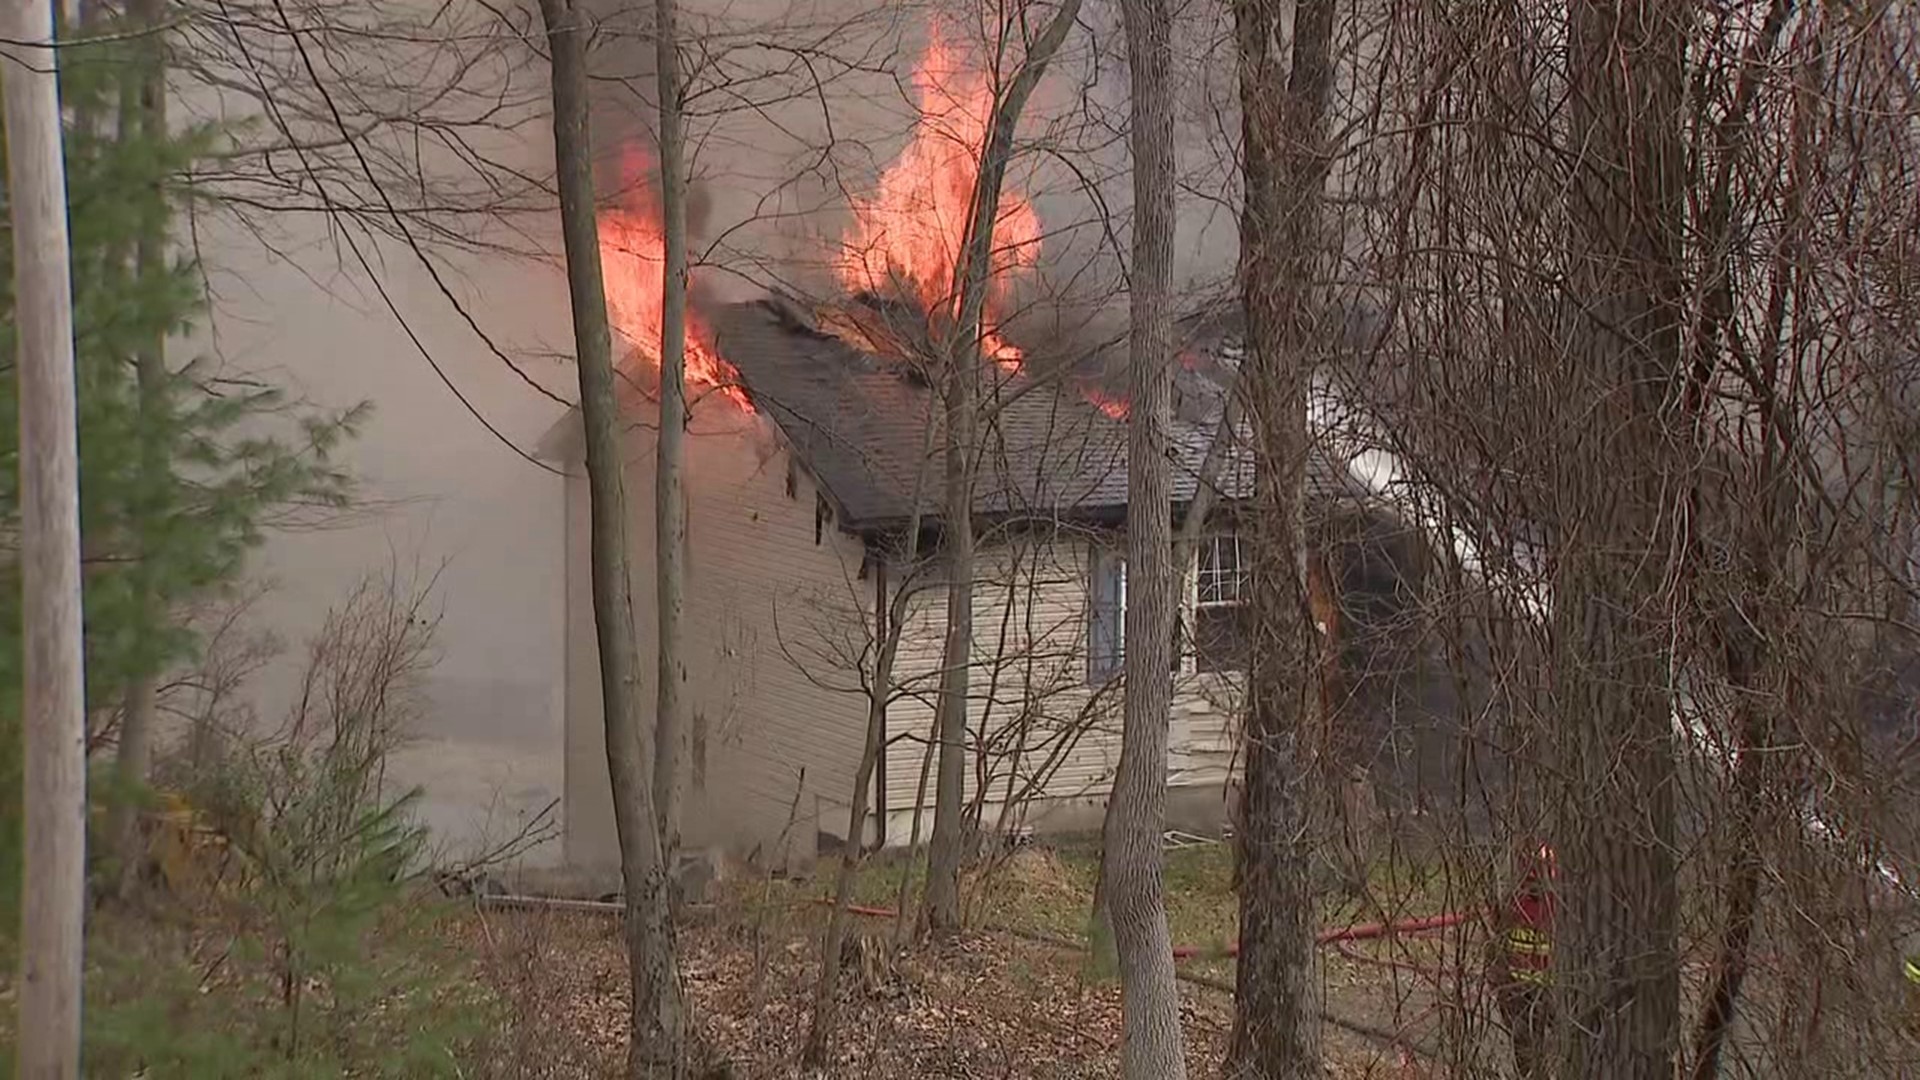 Flames broke out around 12:30 p.m. Monday afternoon along Woodhaven Drive in Ross Township.